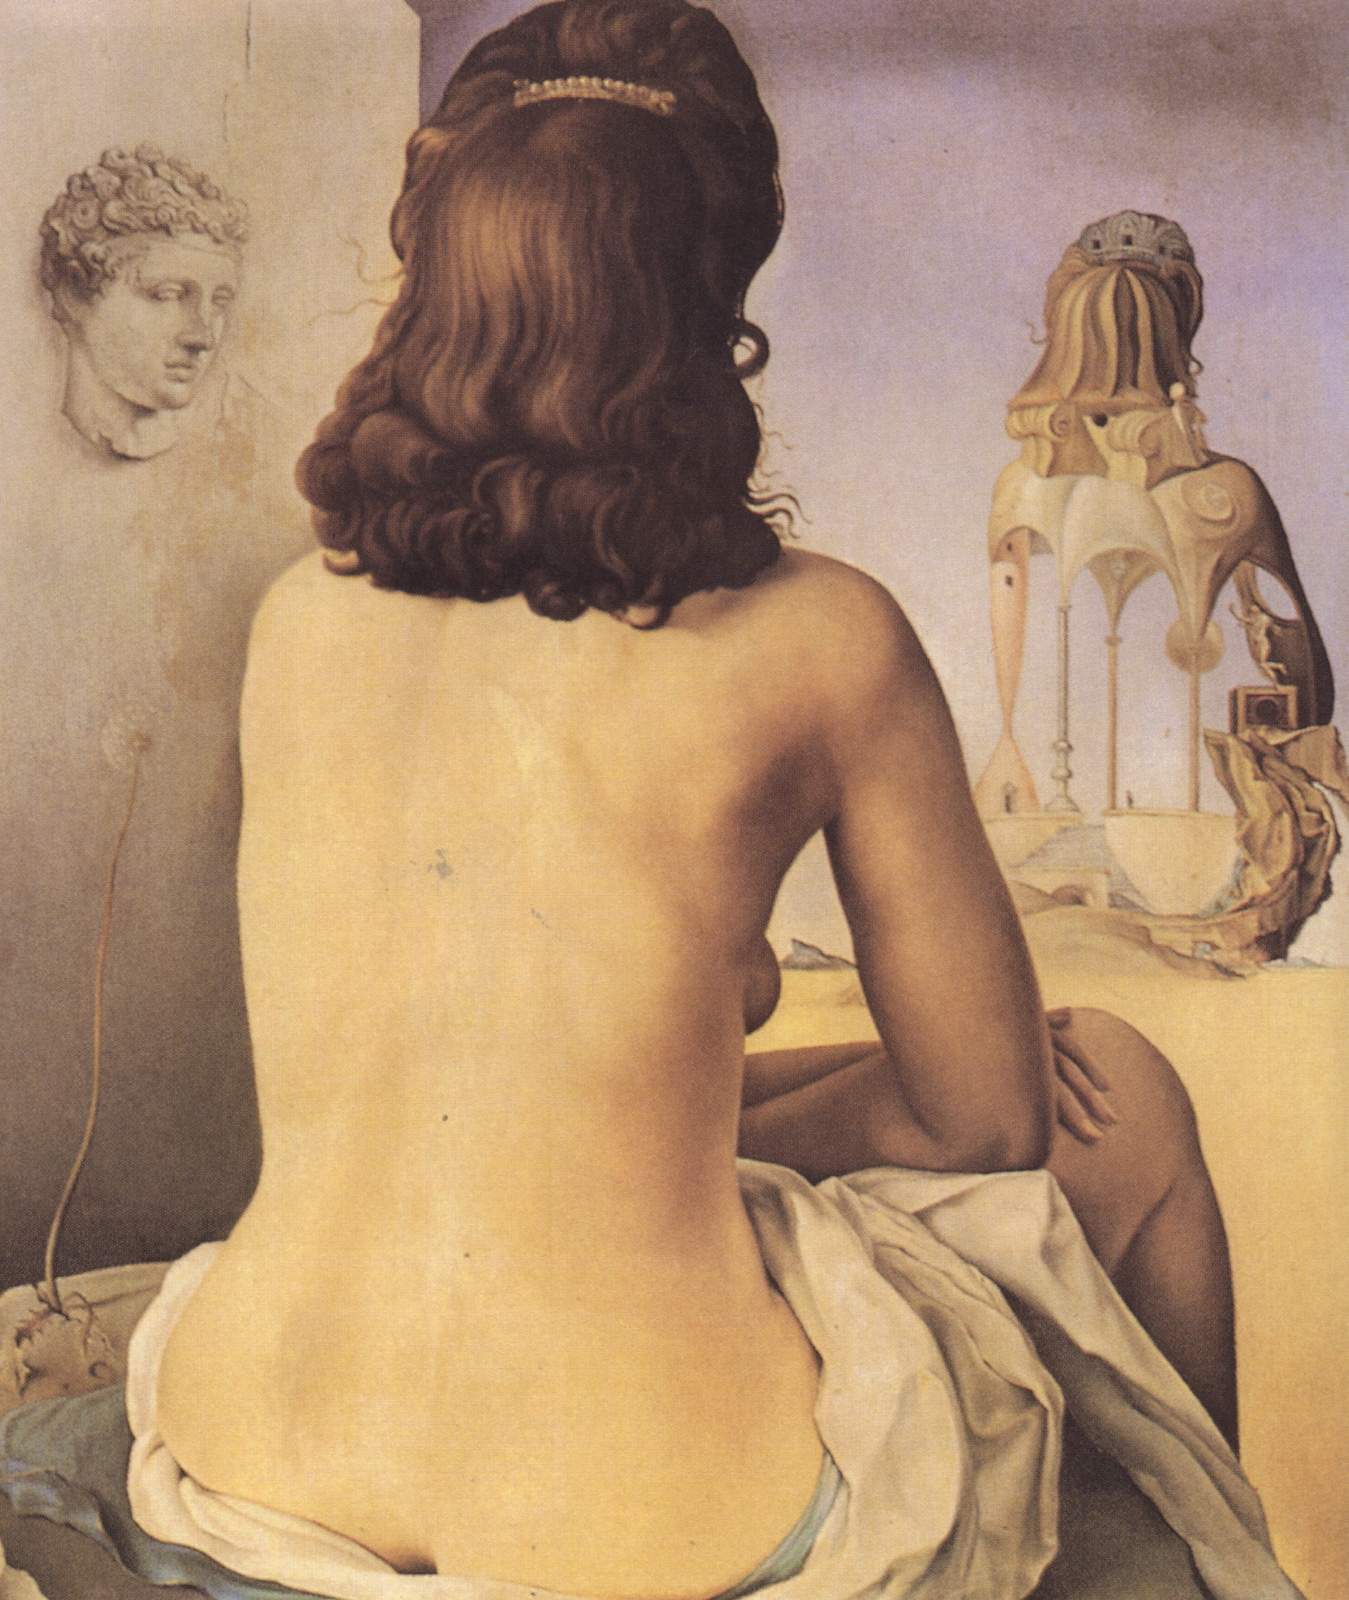 My Wife, Nude, Contemplating Her Own Flesh Becoming Stairs, Three Vertebrae of a Column, Sky and Architecture (1945).